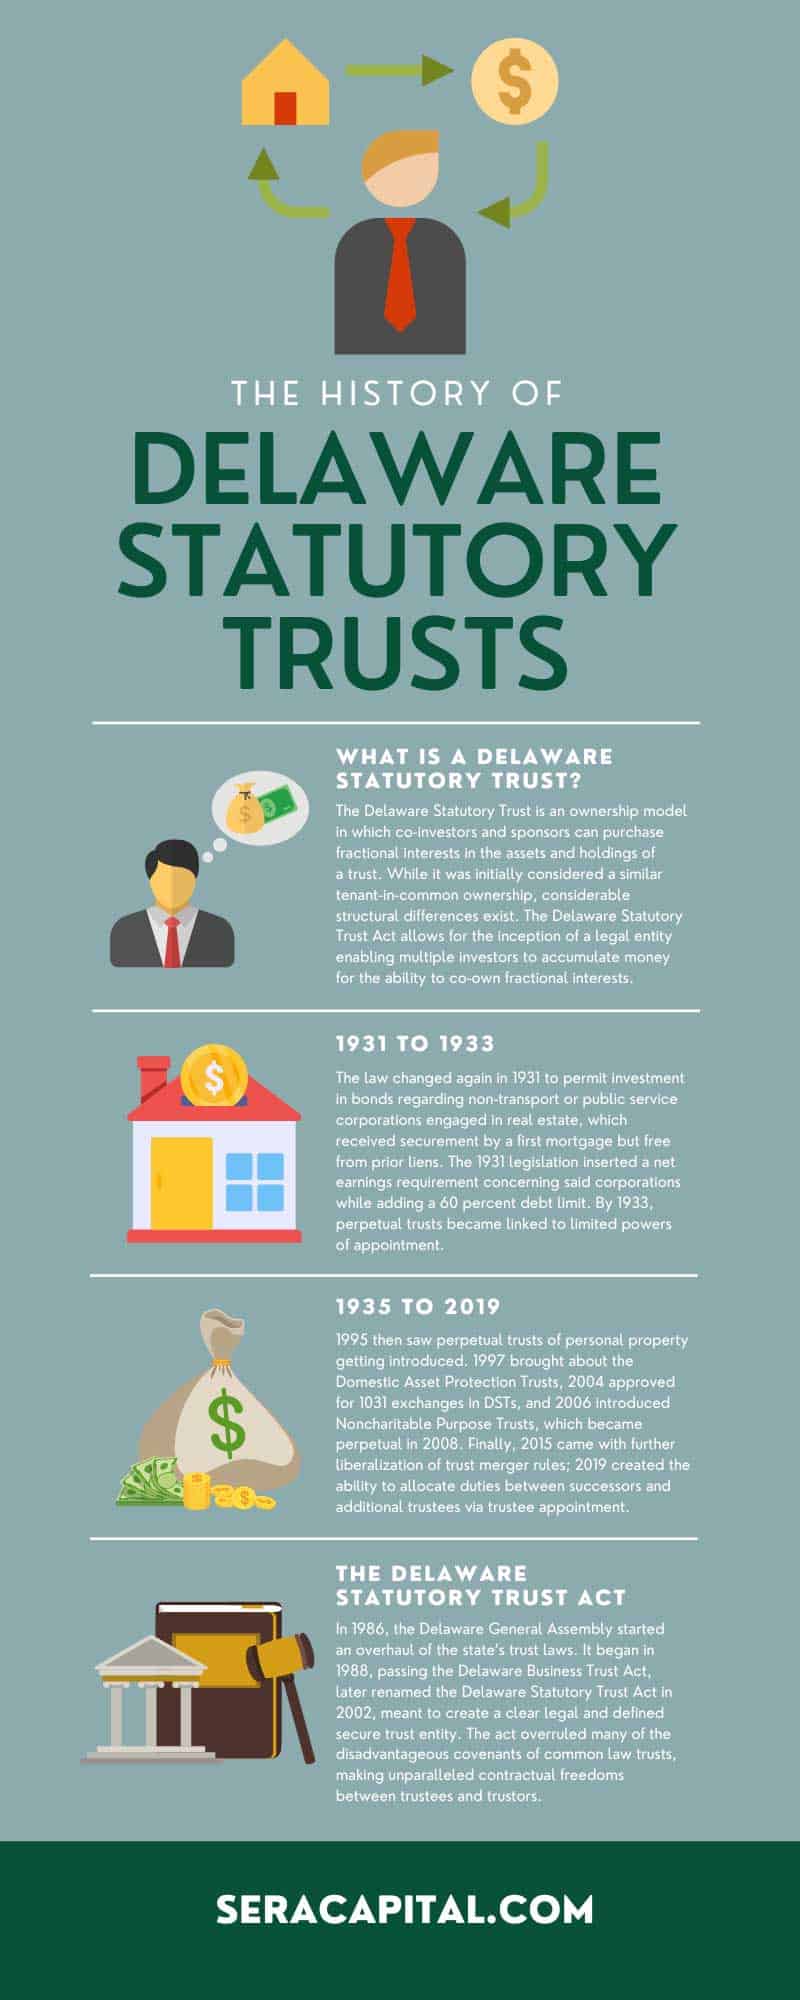 The History of Delaware Statutory Trusts